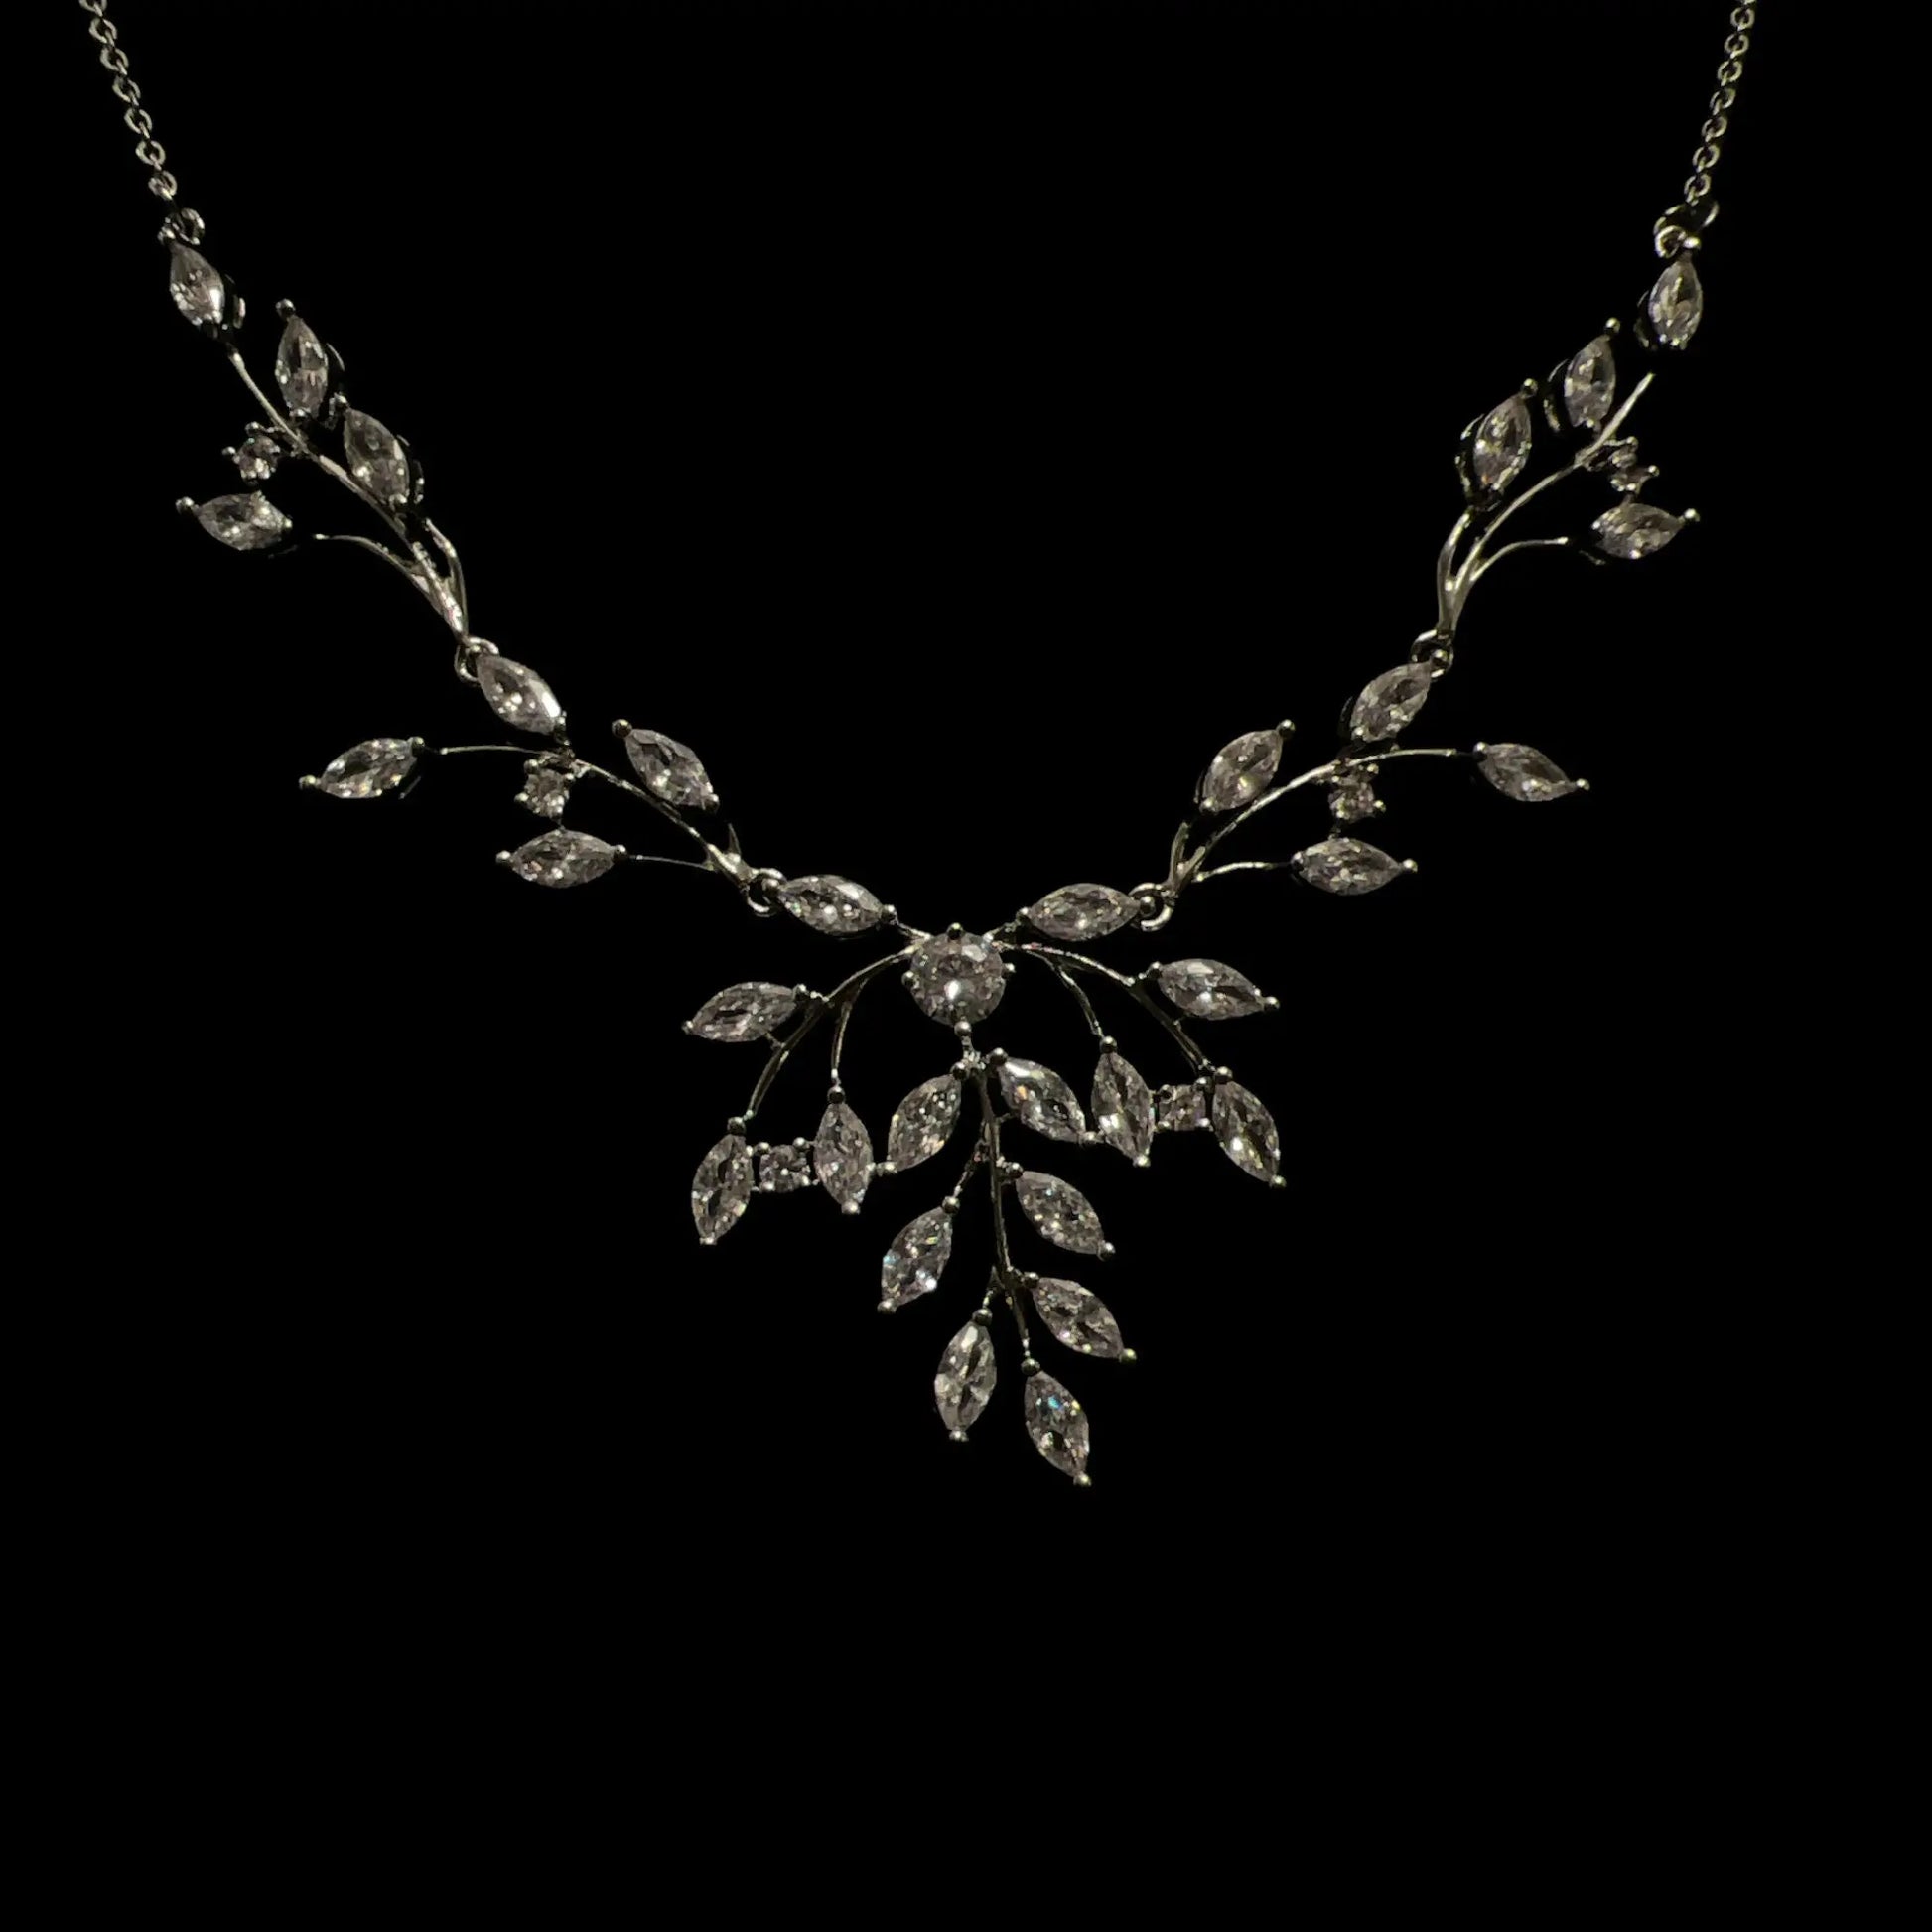 Luxury Leaf Statement Necklace | Crystal Jewelry Necklace and Earrings - Silver Kebble Jewelry